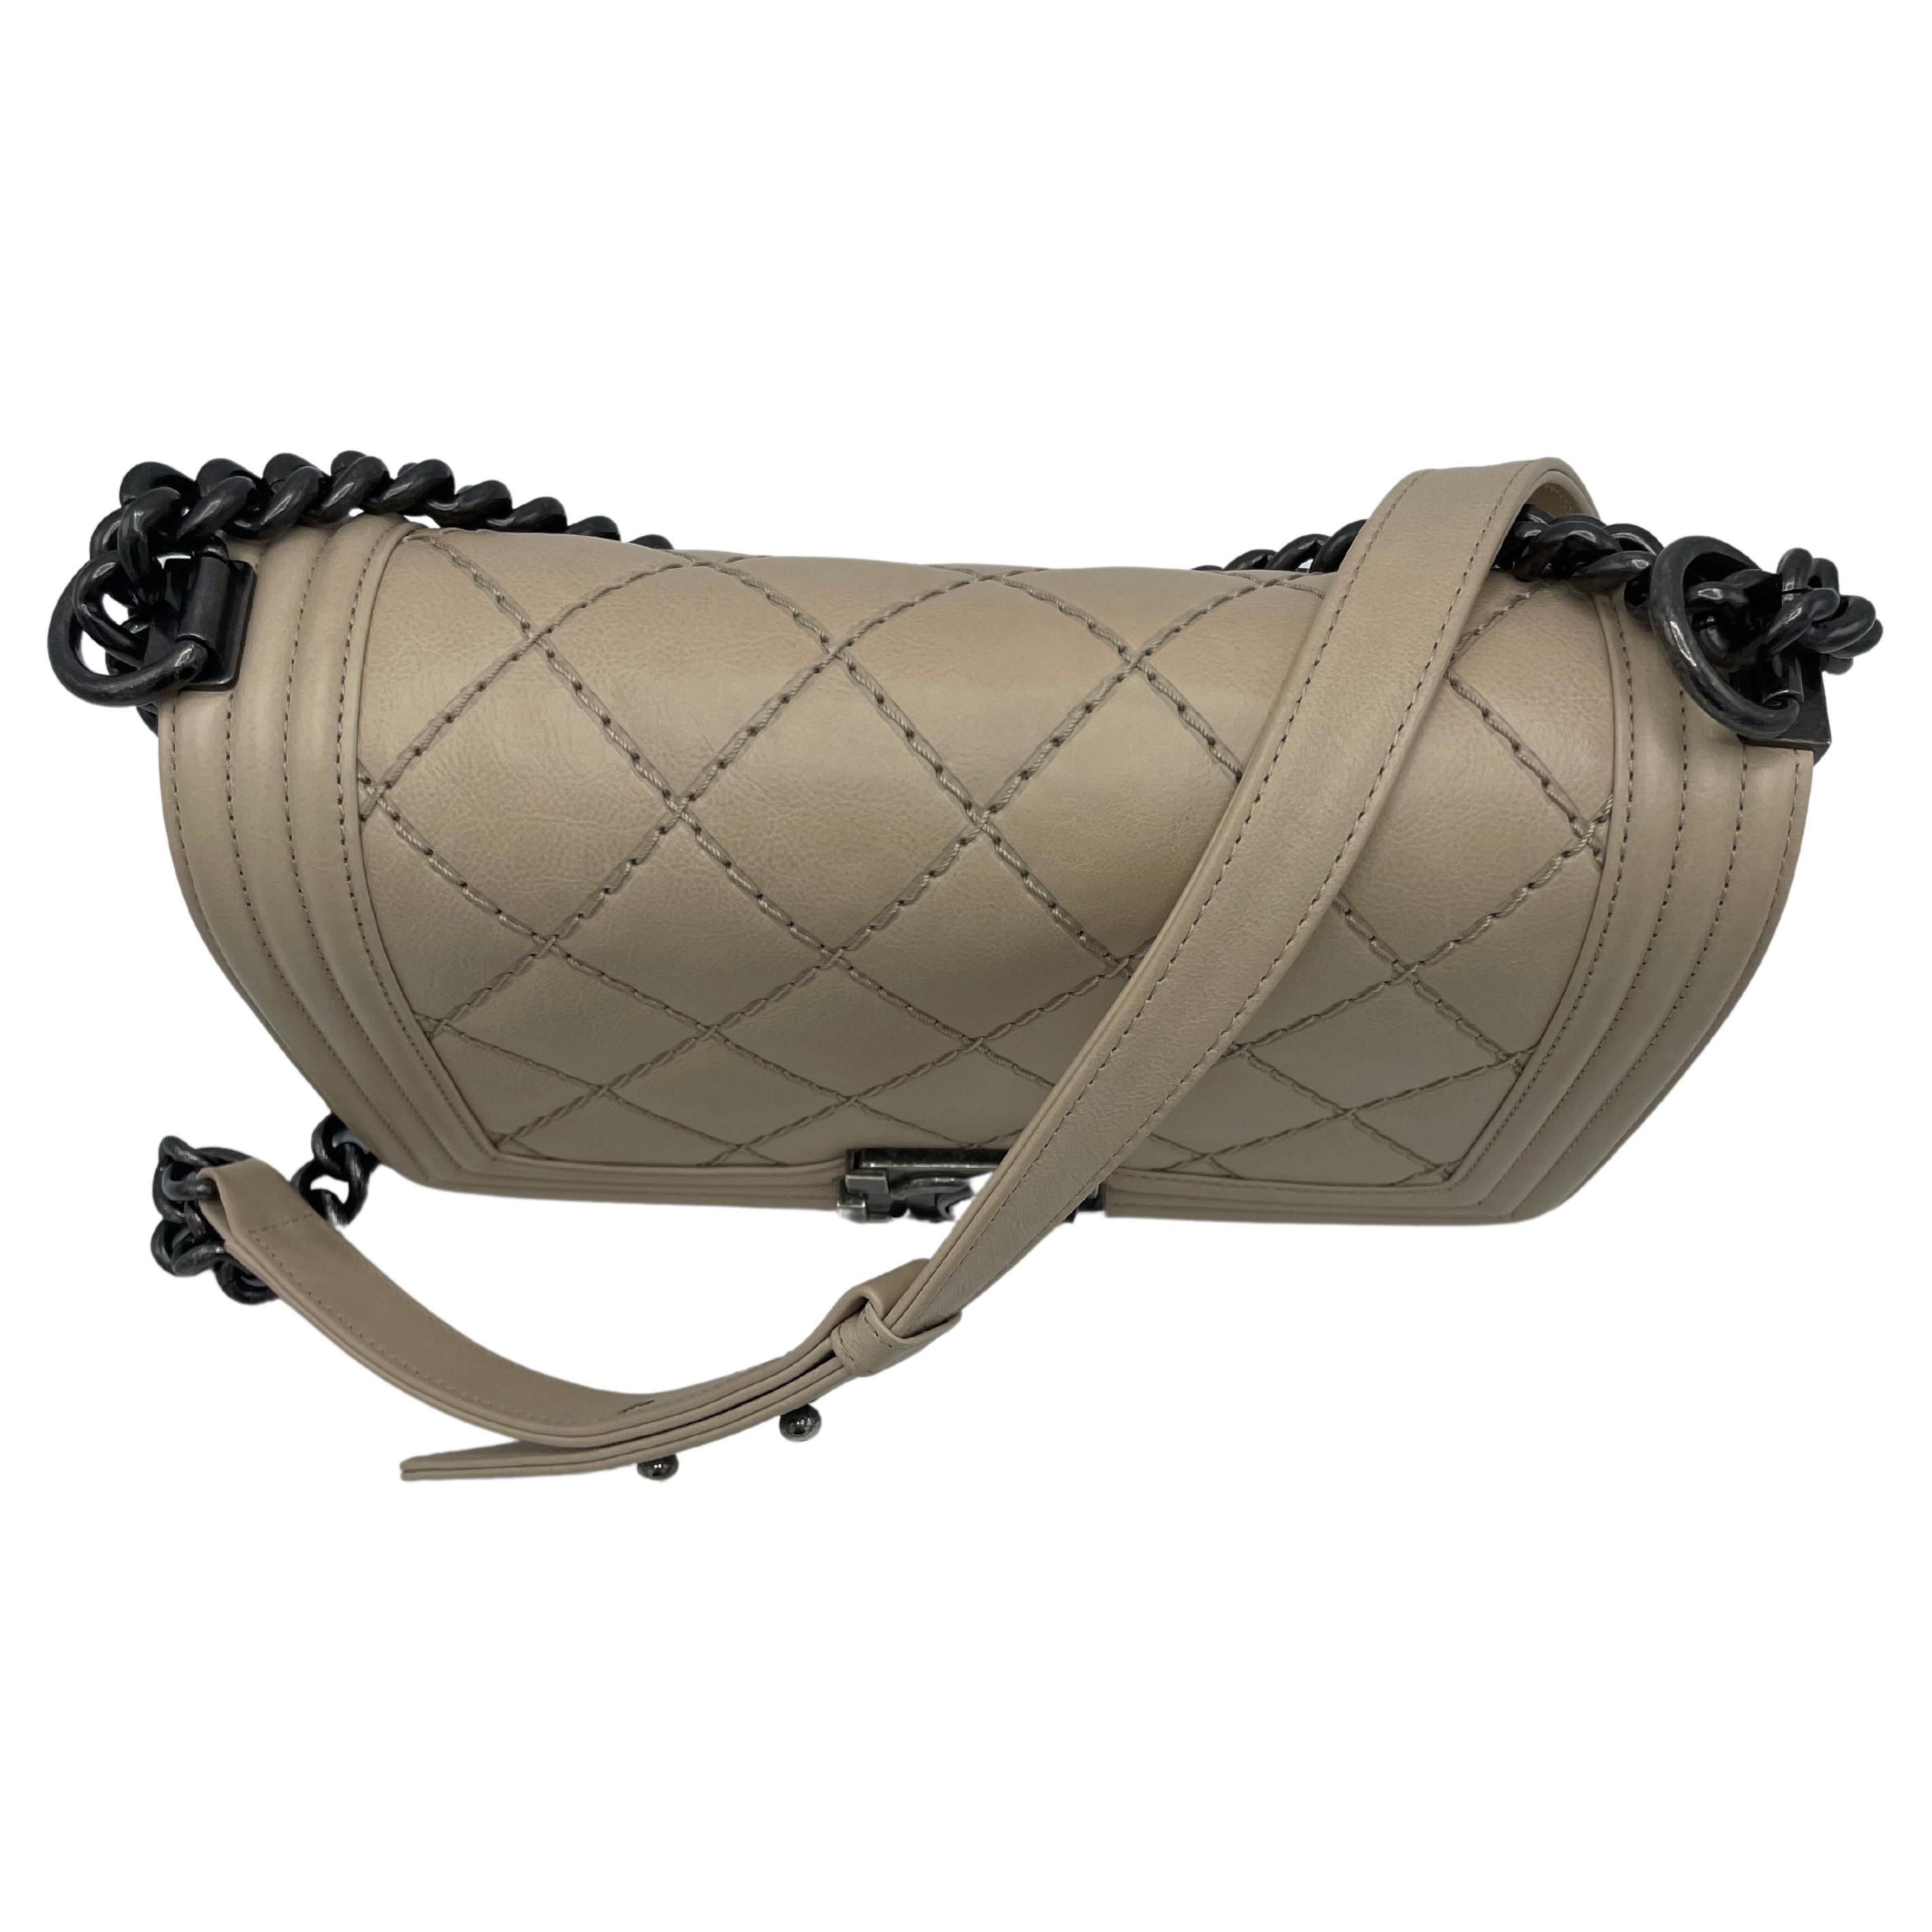 Chanel Beige Boy Flap Bag Quilted Calfskin Medium. This 2013-2014 version has a leather and chain-link shoulder strap with an adjustable buckle, a push-lock closing, and an inside slide pocket surrounded by silver hardware. Karl Lagerfeld reportedly